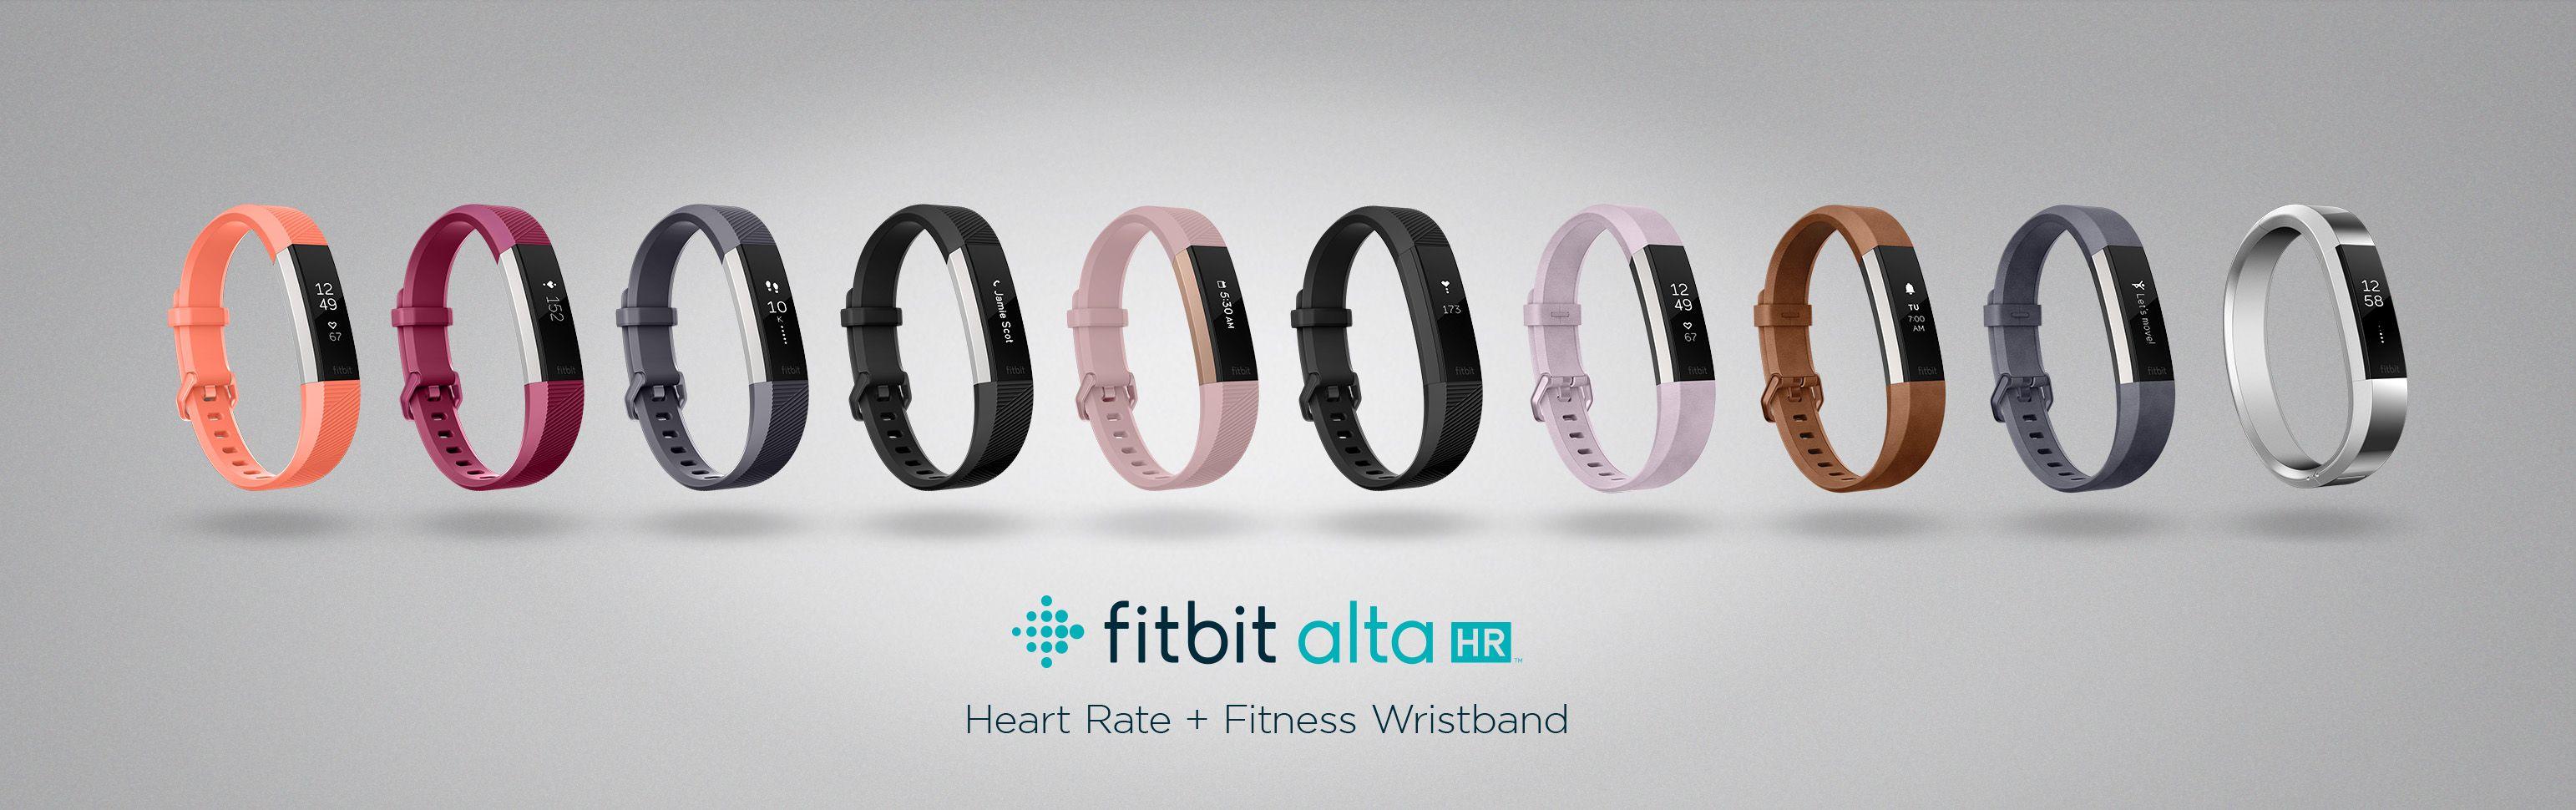 Fitbit reveals the Alta HR with the 'World's Slimmest Heart Rate